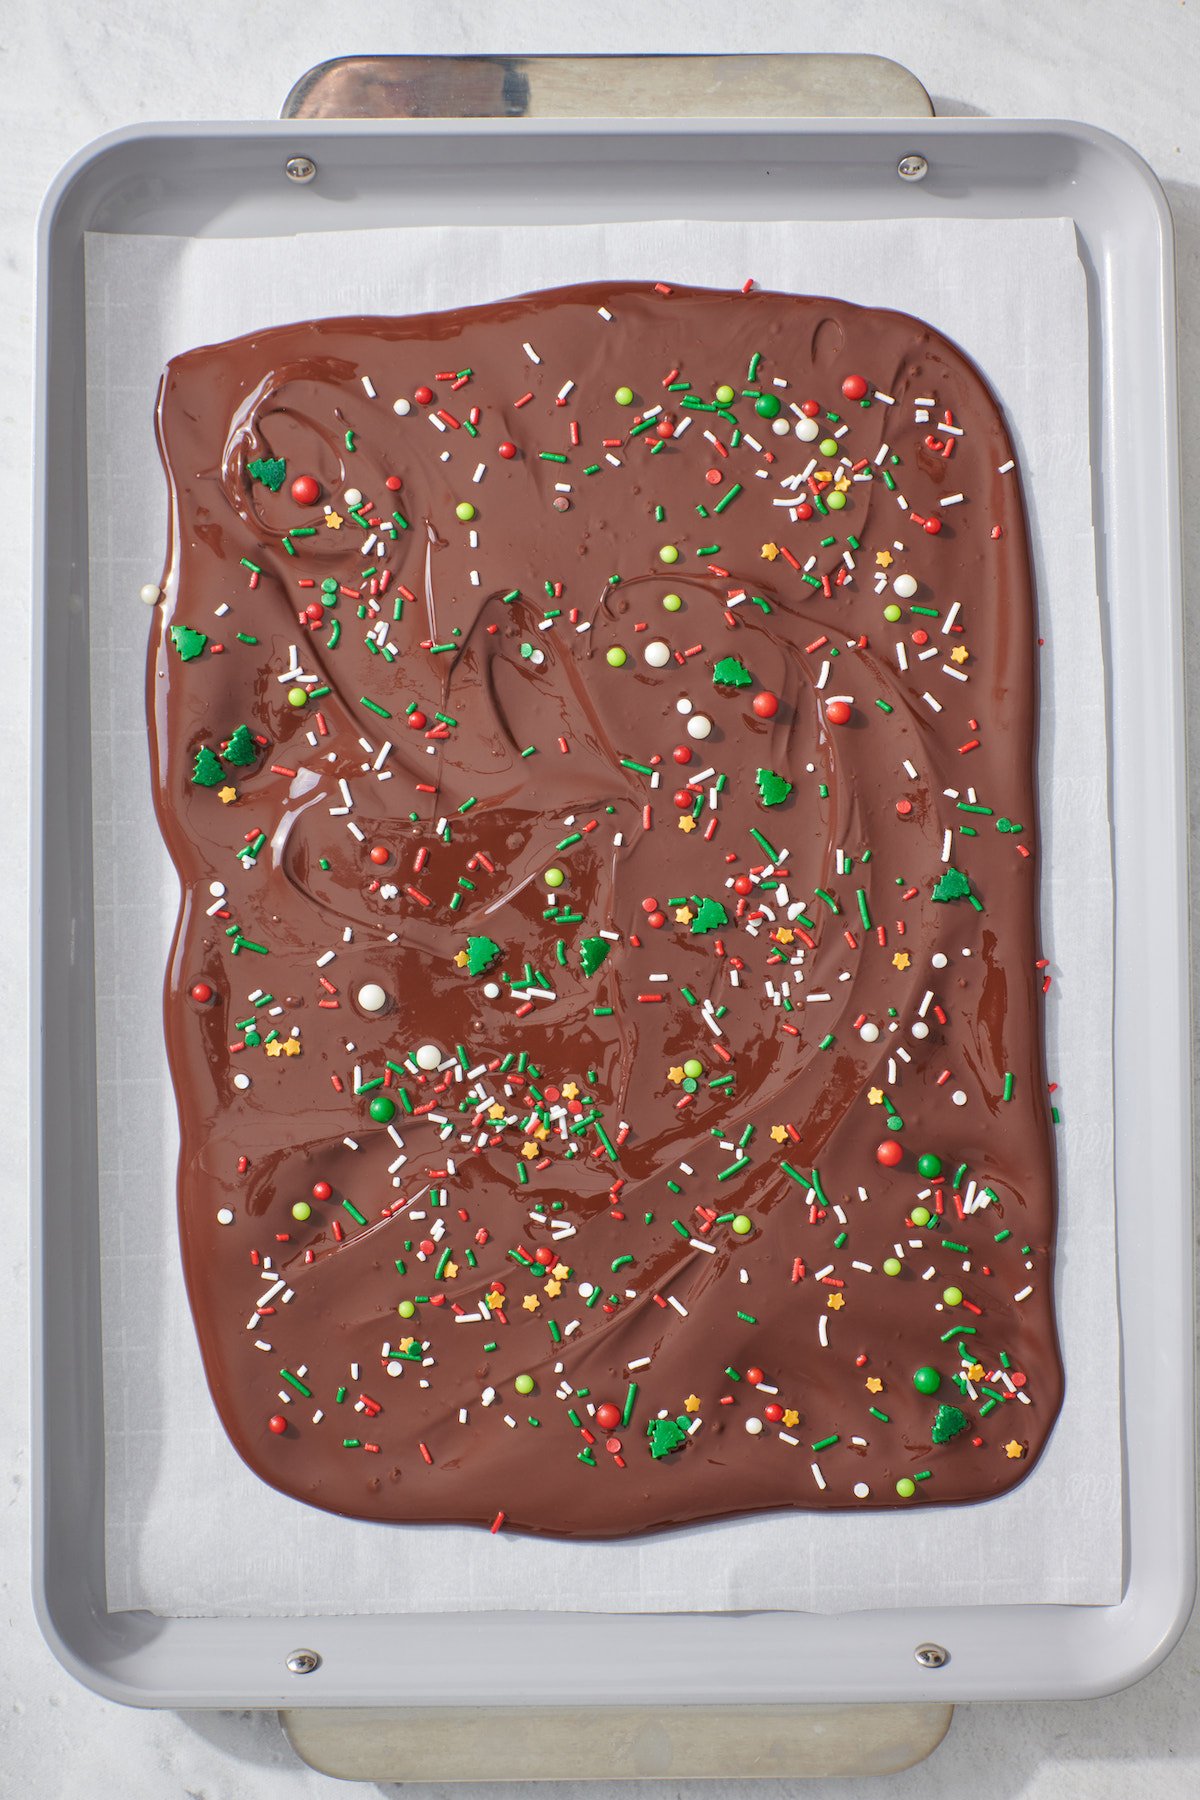 Melted chocolate on baking sheet with sprinkles.